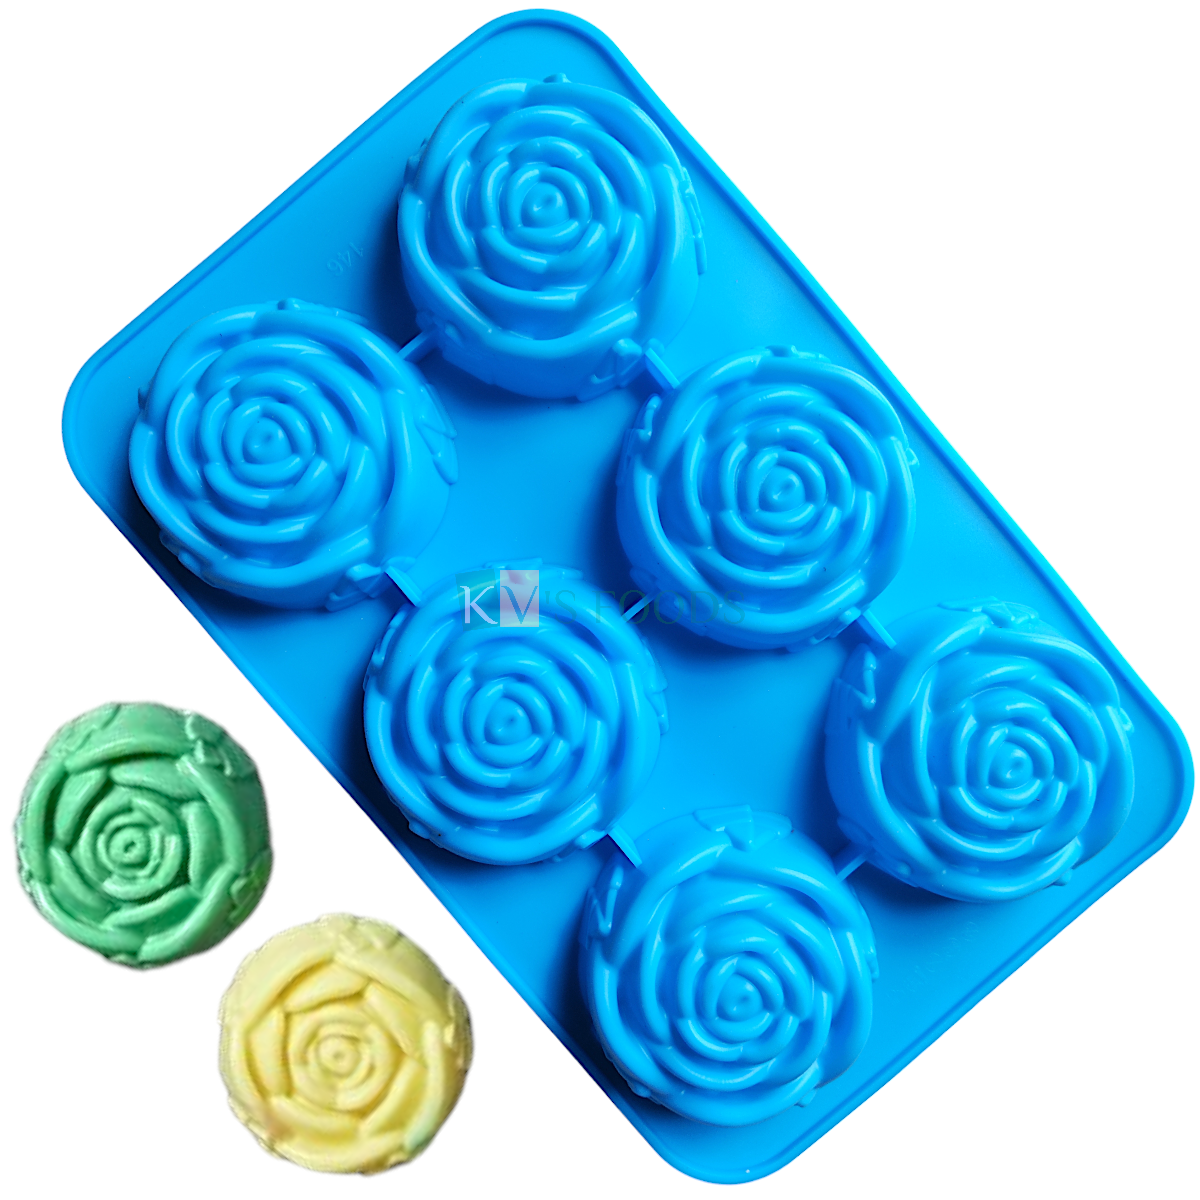 1 PC 6 Cavity Rose Design Shape Silicon Mould Chocolate Mousse Dessert Bakeware Mini Bread Loaf, Brownie, Cornbread, Muffin, Kids Handmade Soap, Ice Cream, Candle Jelly Pudding Cake for Birthday Party